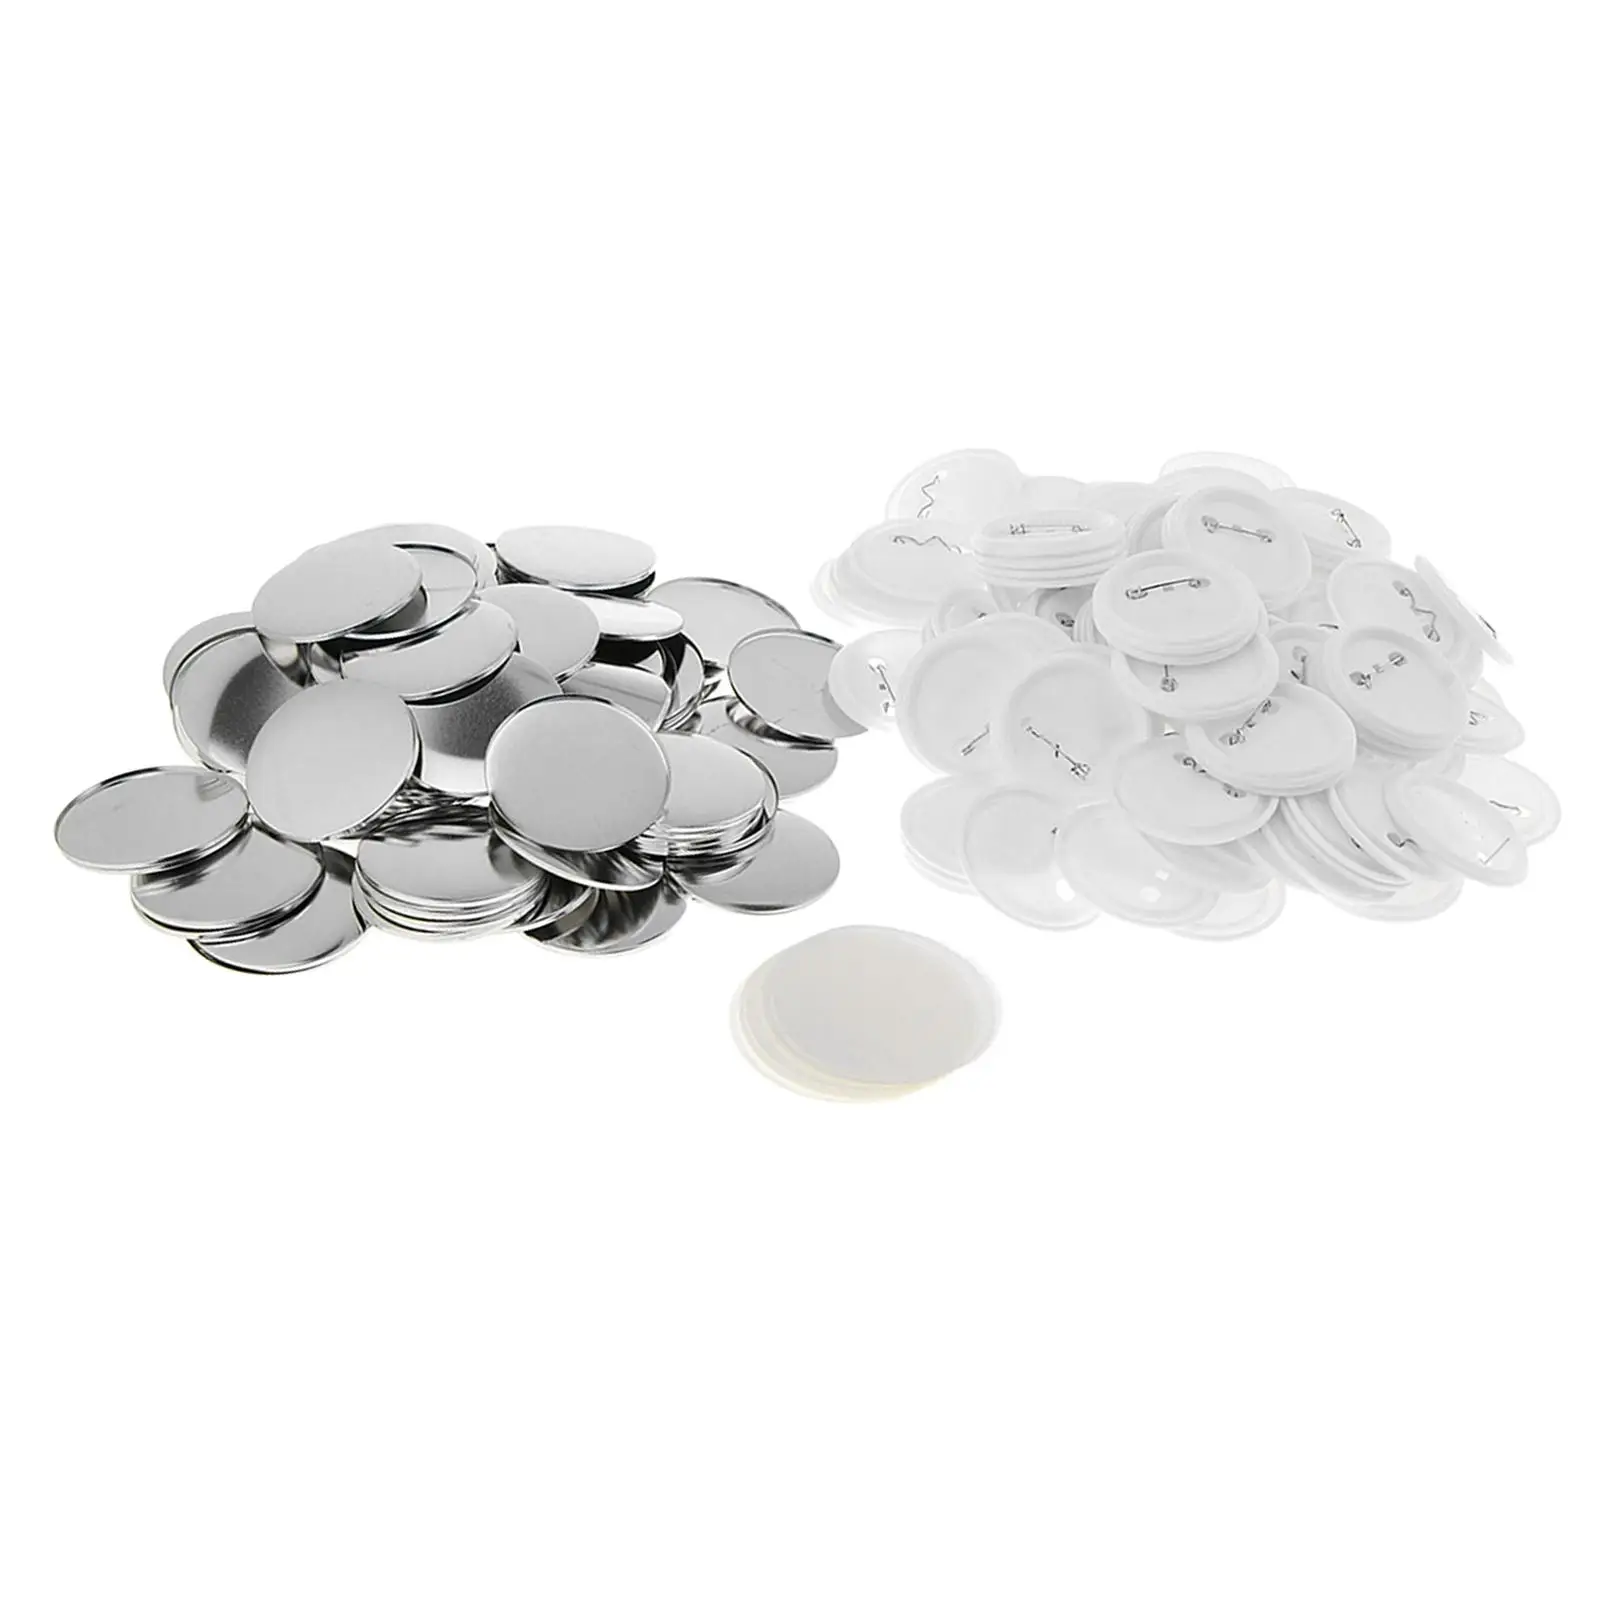 100 Sets Blank Button Making Supplies DIY Crafts Round Badges Buttons